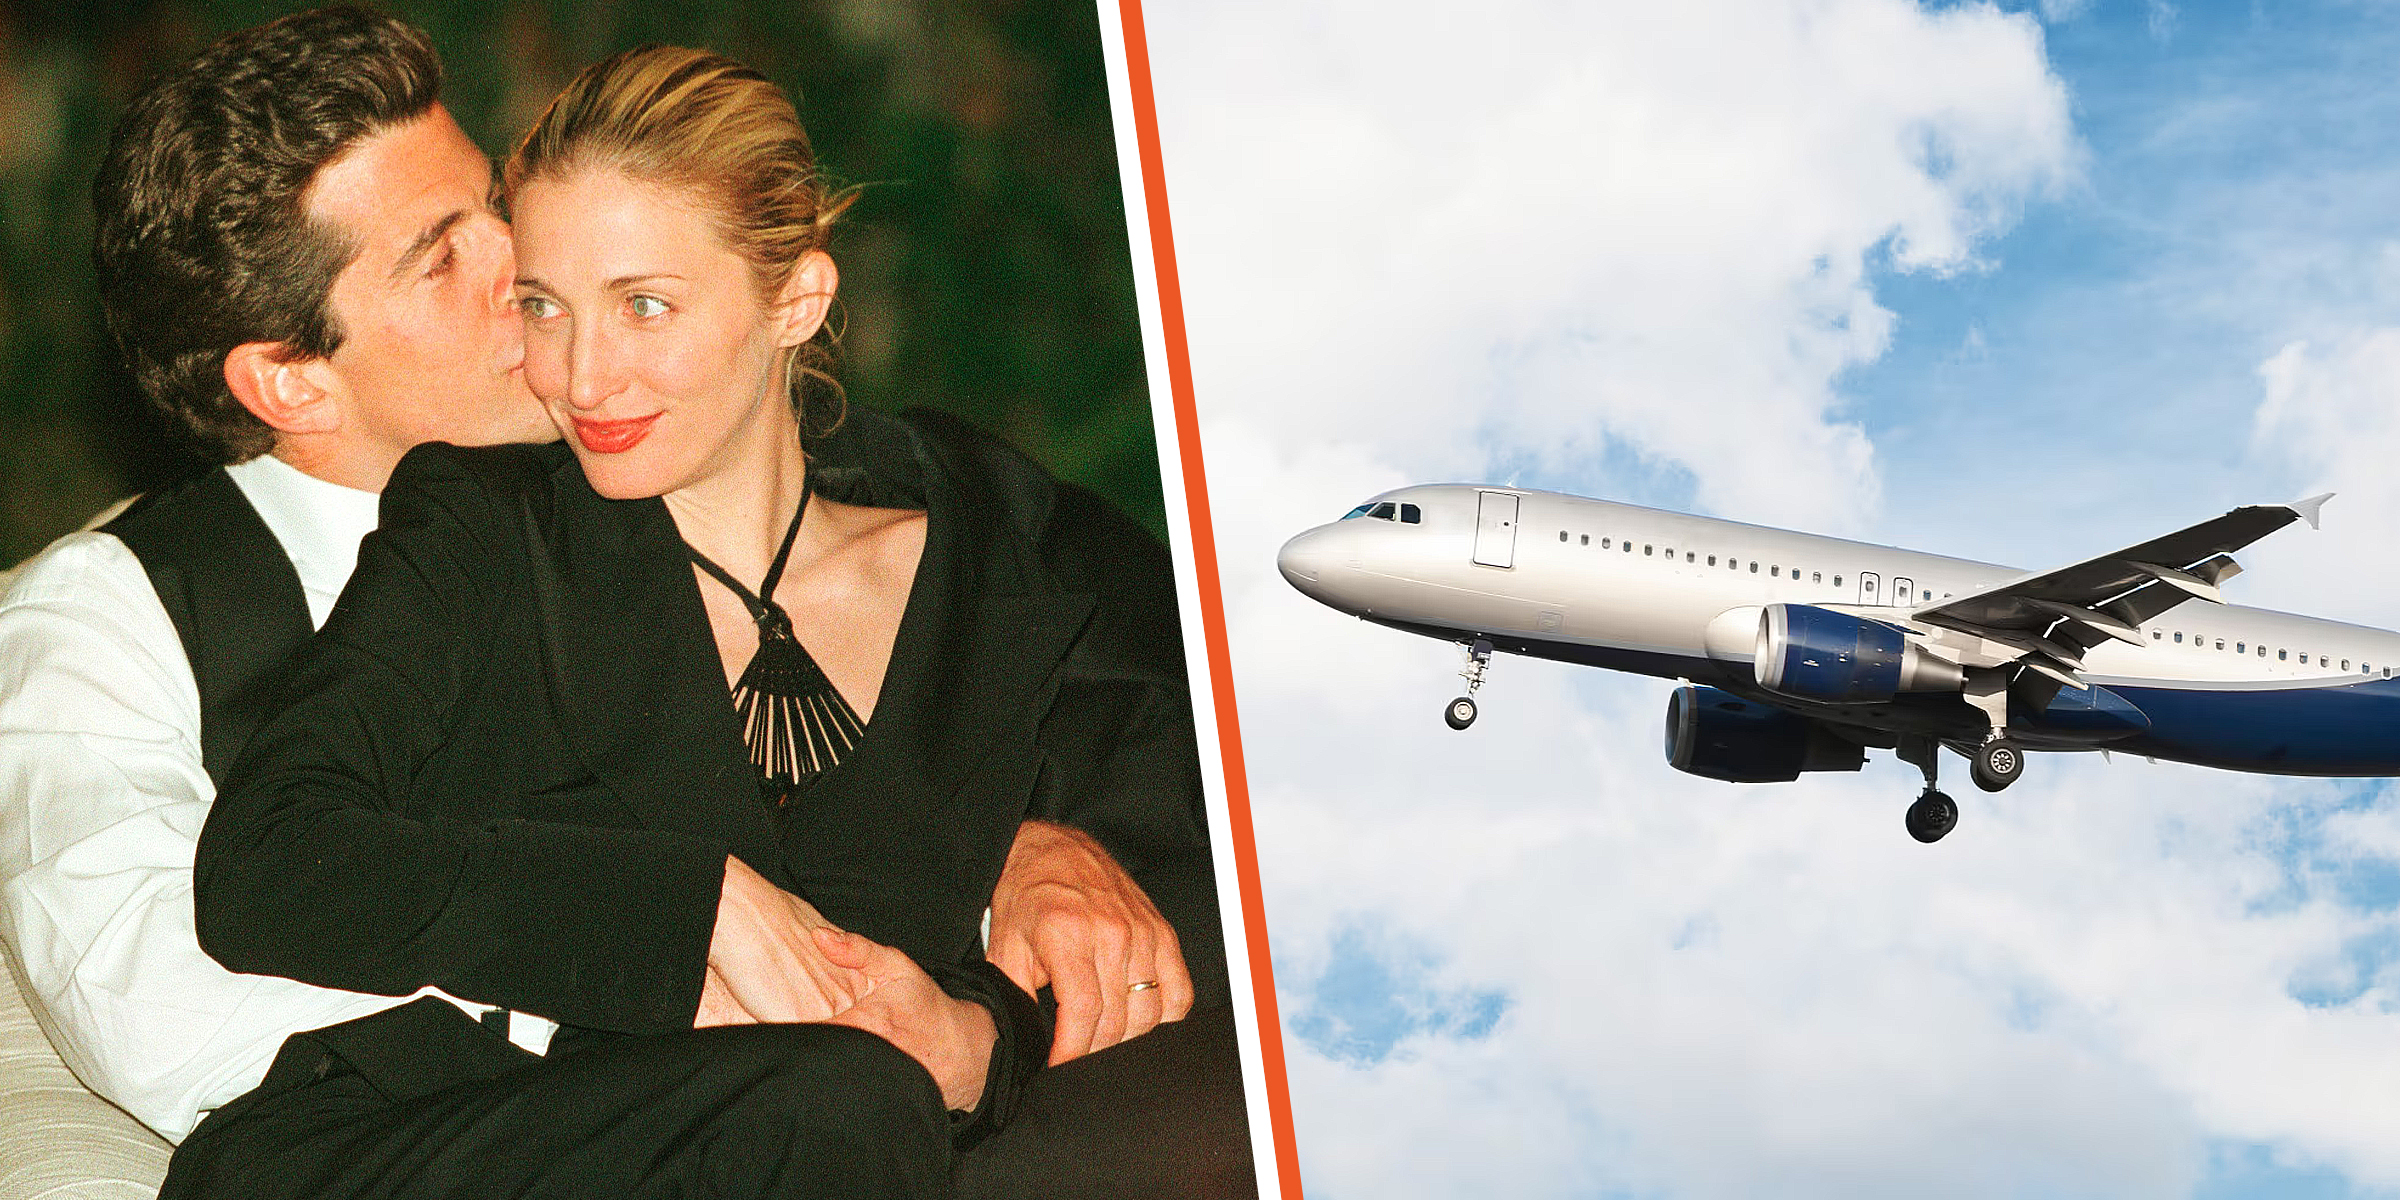 J.F. Kennedy Jr. with his wife Carolyn Bessette | An airplane | Source: | Getty Images | Freepik.com/Racool_studio